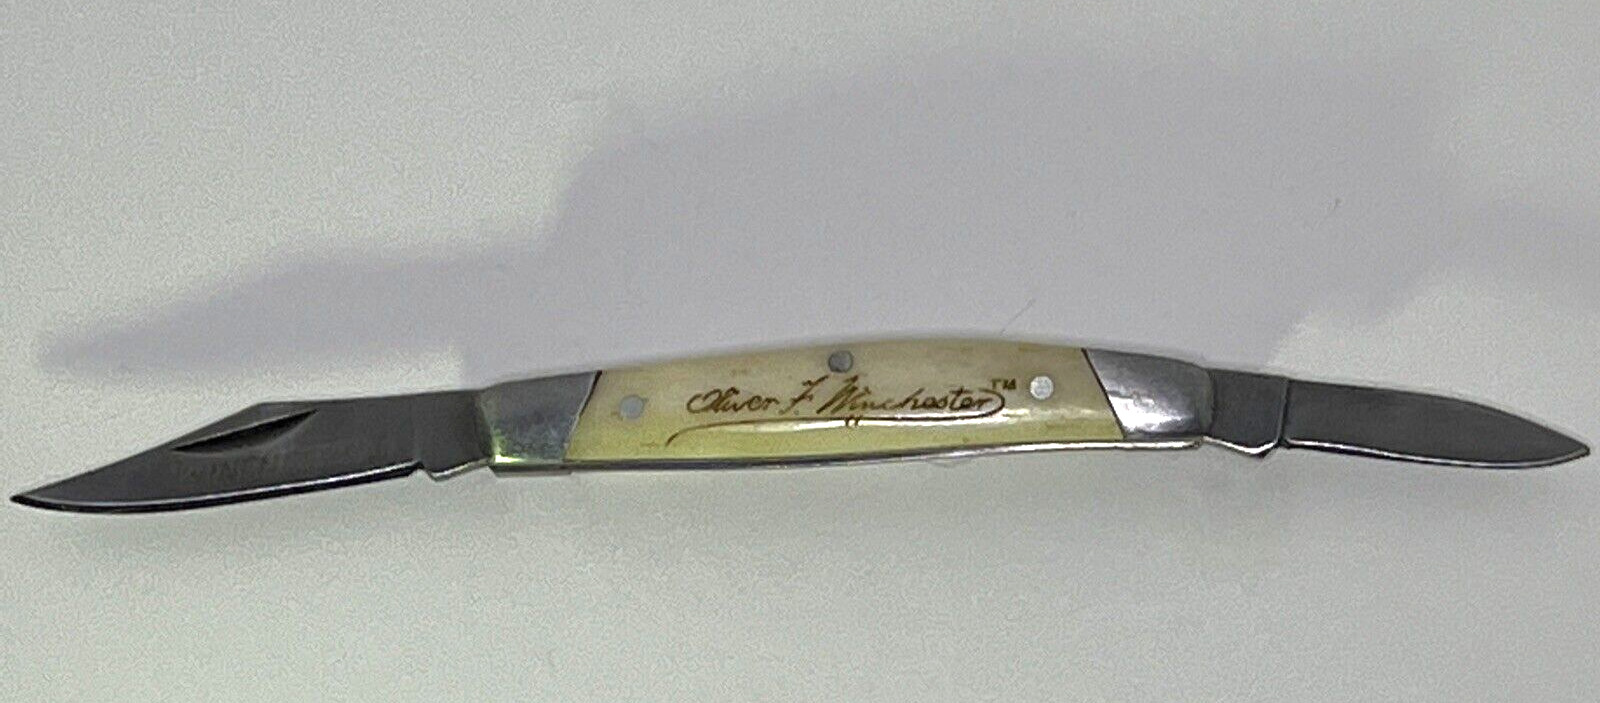 OLIVER F WINCHESTER 2 BLADE POCKET KNIFE RARE COLLECTIBLE